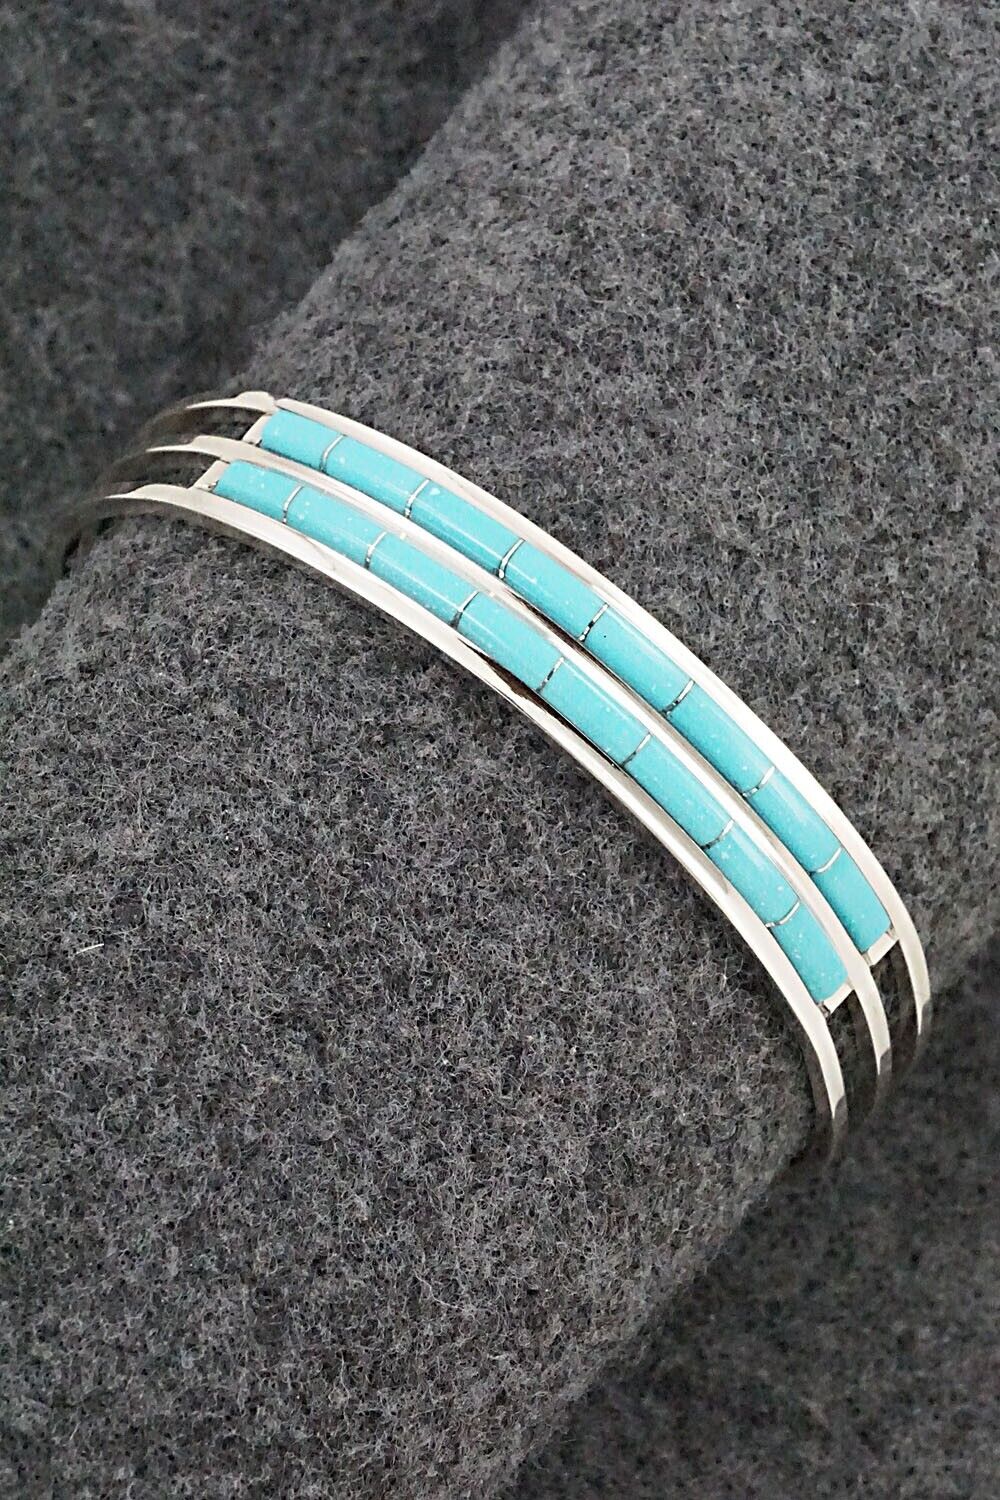 Turquoise & Sterling Silver Bracelet - Anson Wallace